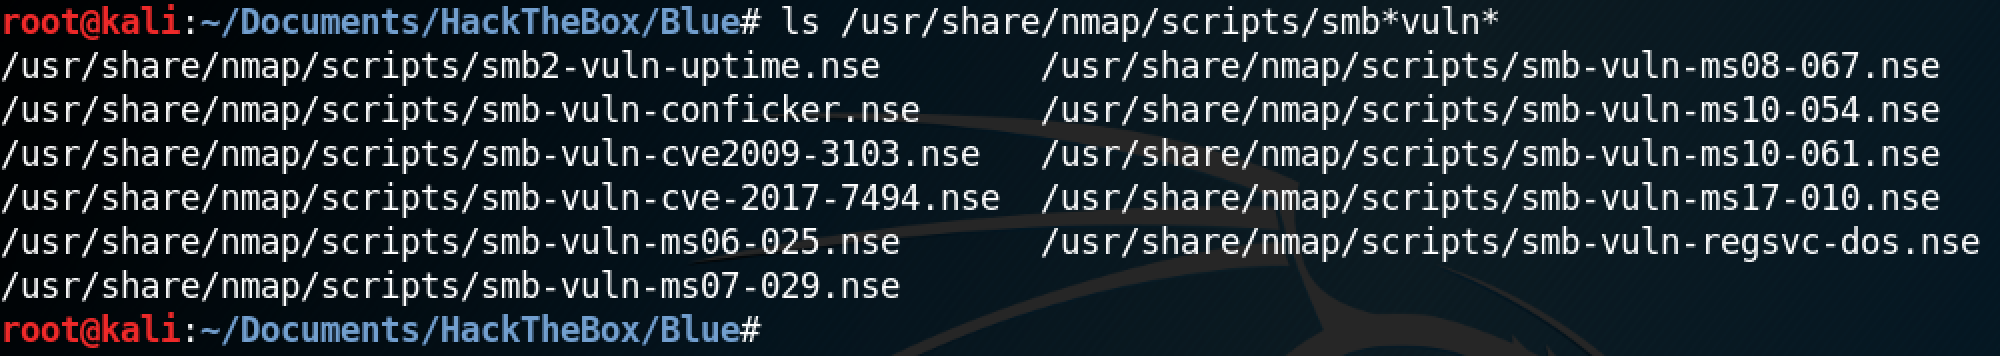 Nmap scripts related to vulnerable SMB versions.